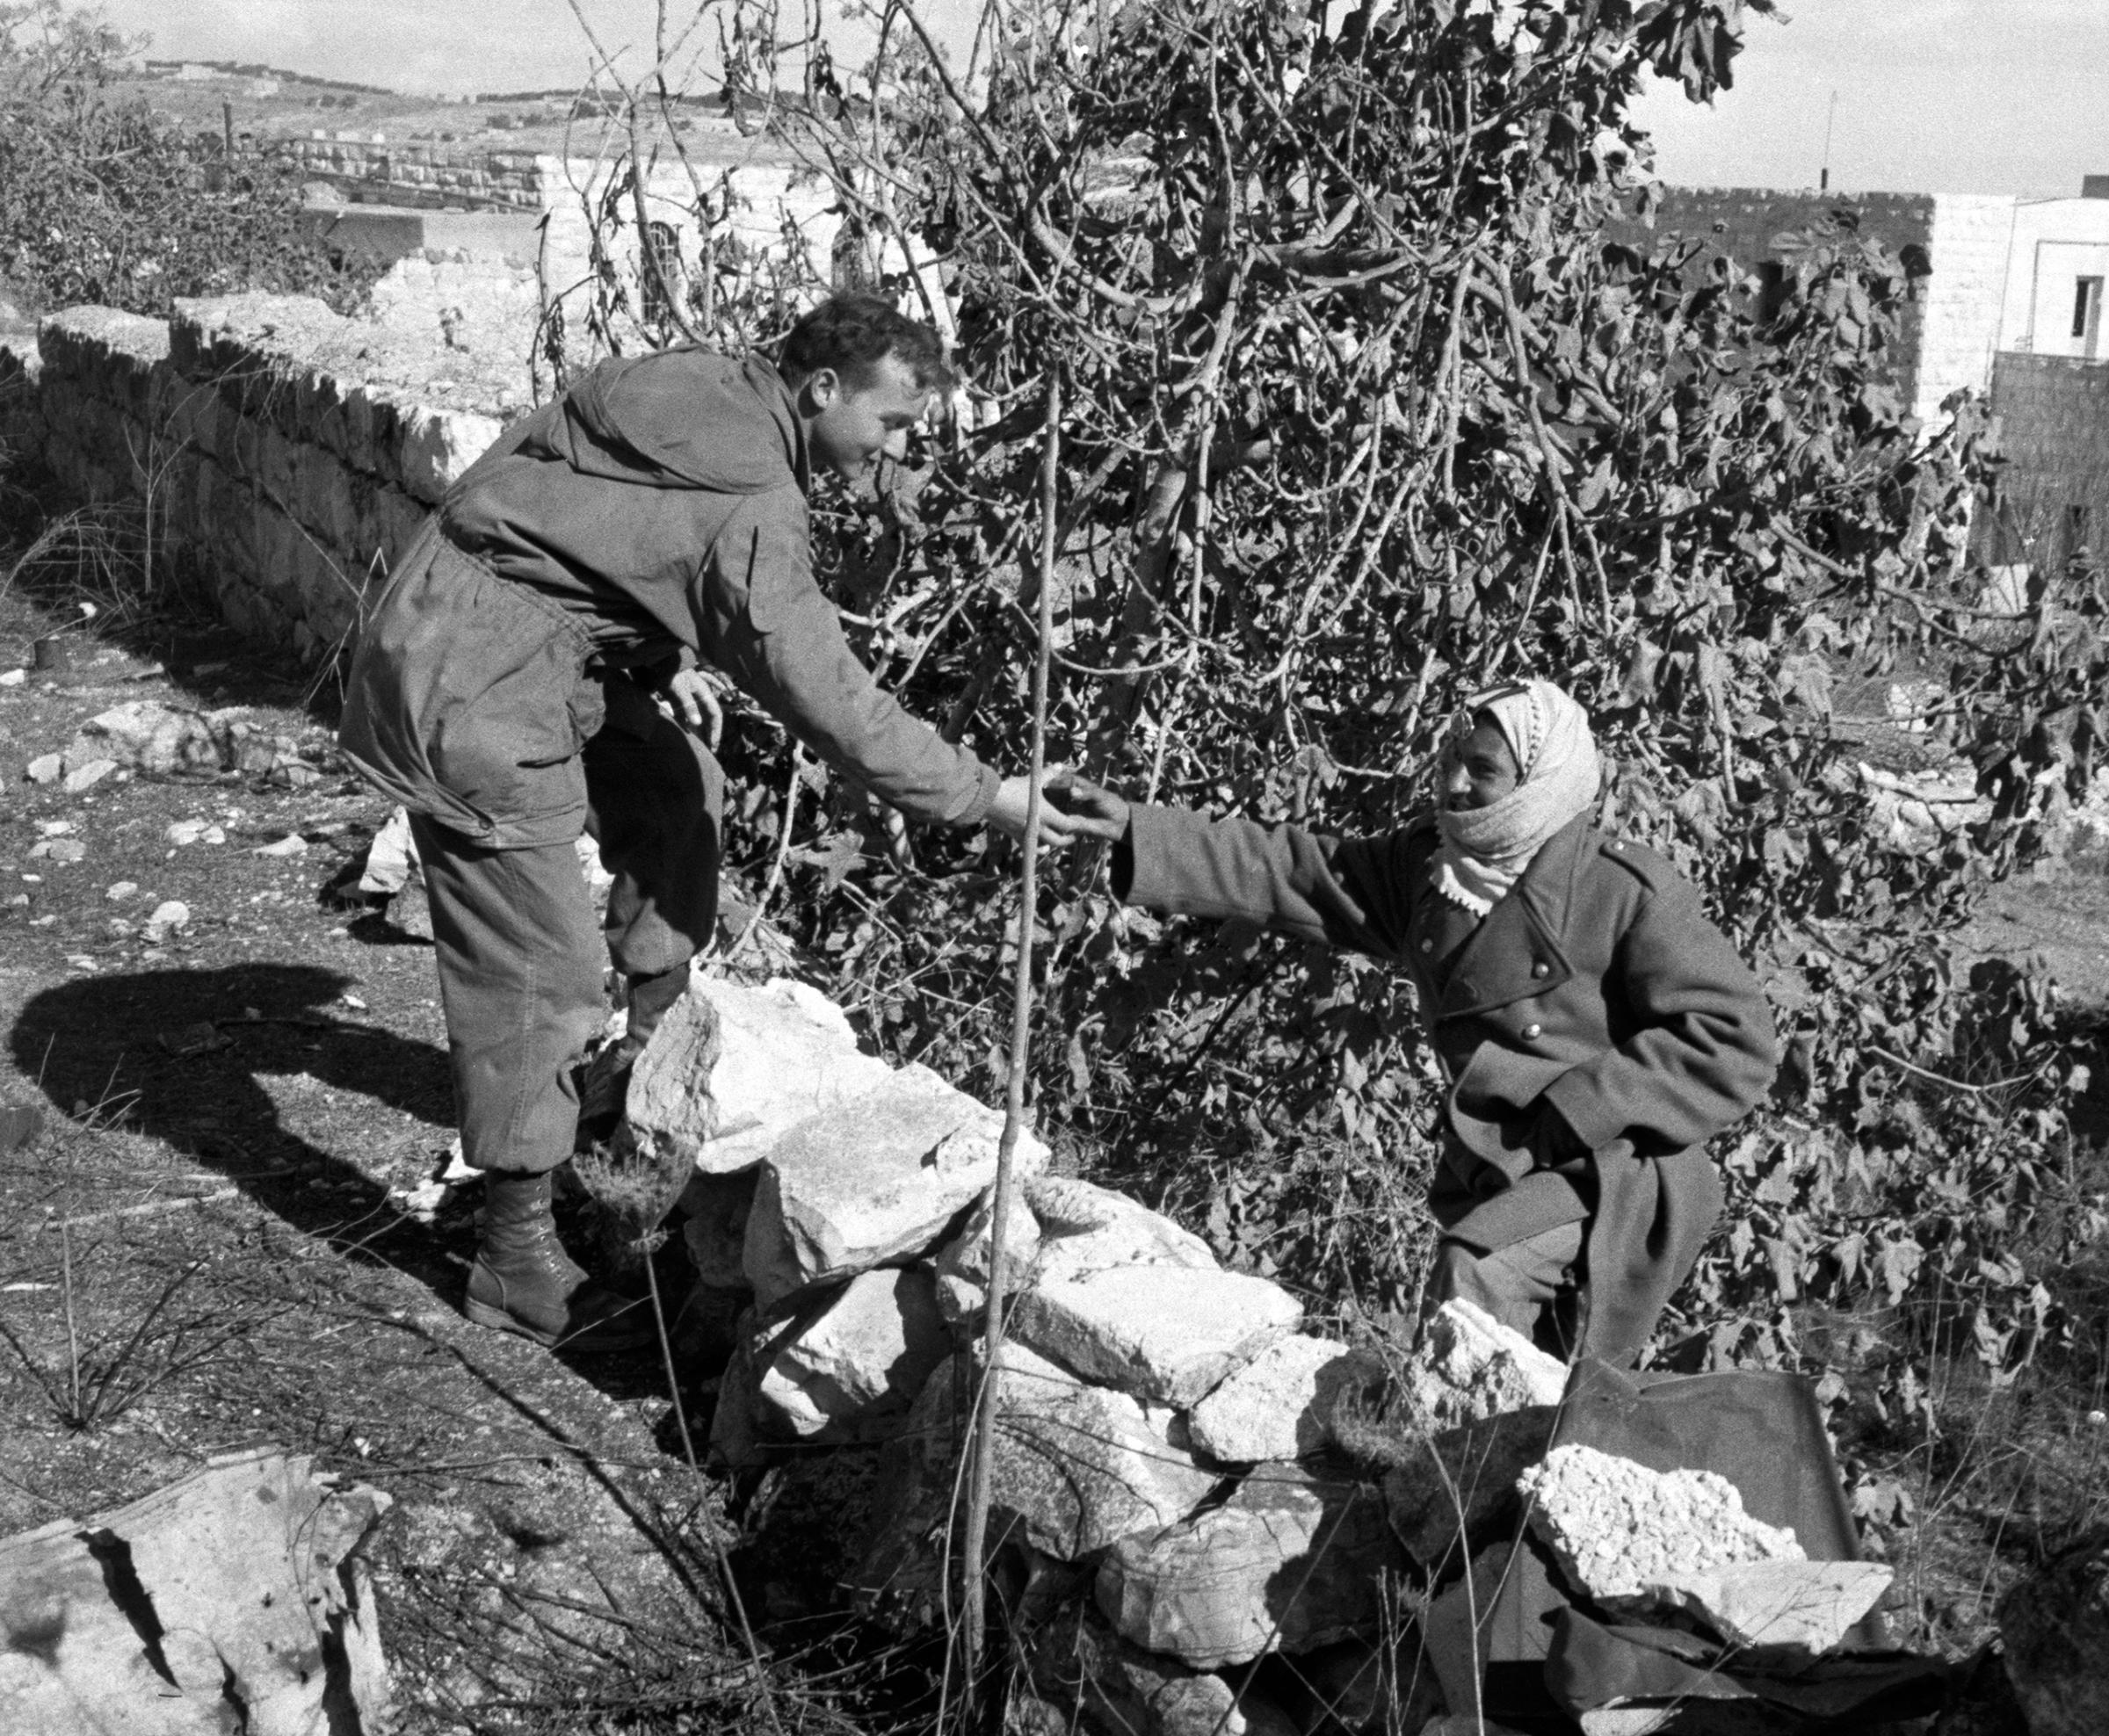 A Jordanian soldier hands a cup of tea to an Israeli paratrooper, at the dividing "Green Line" in Jerusalem, 1956.